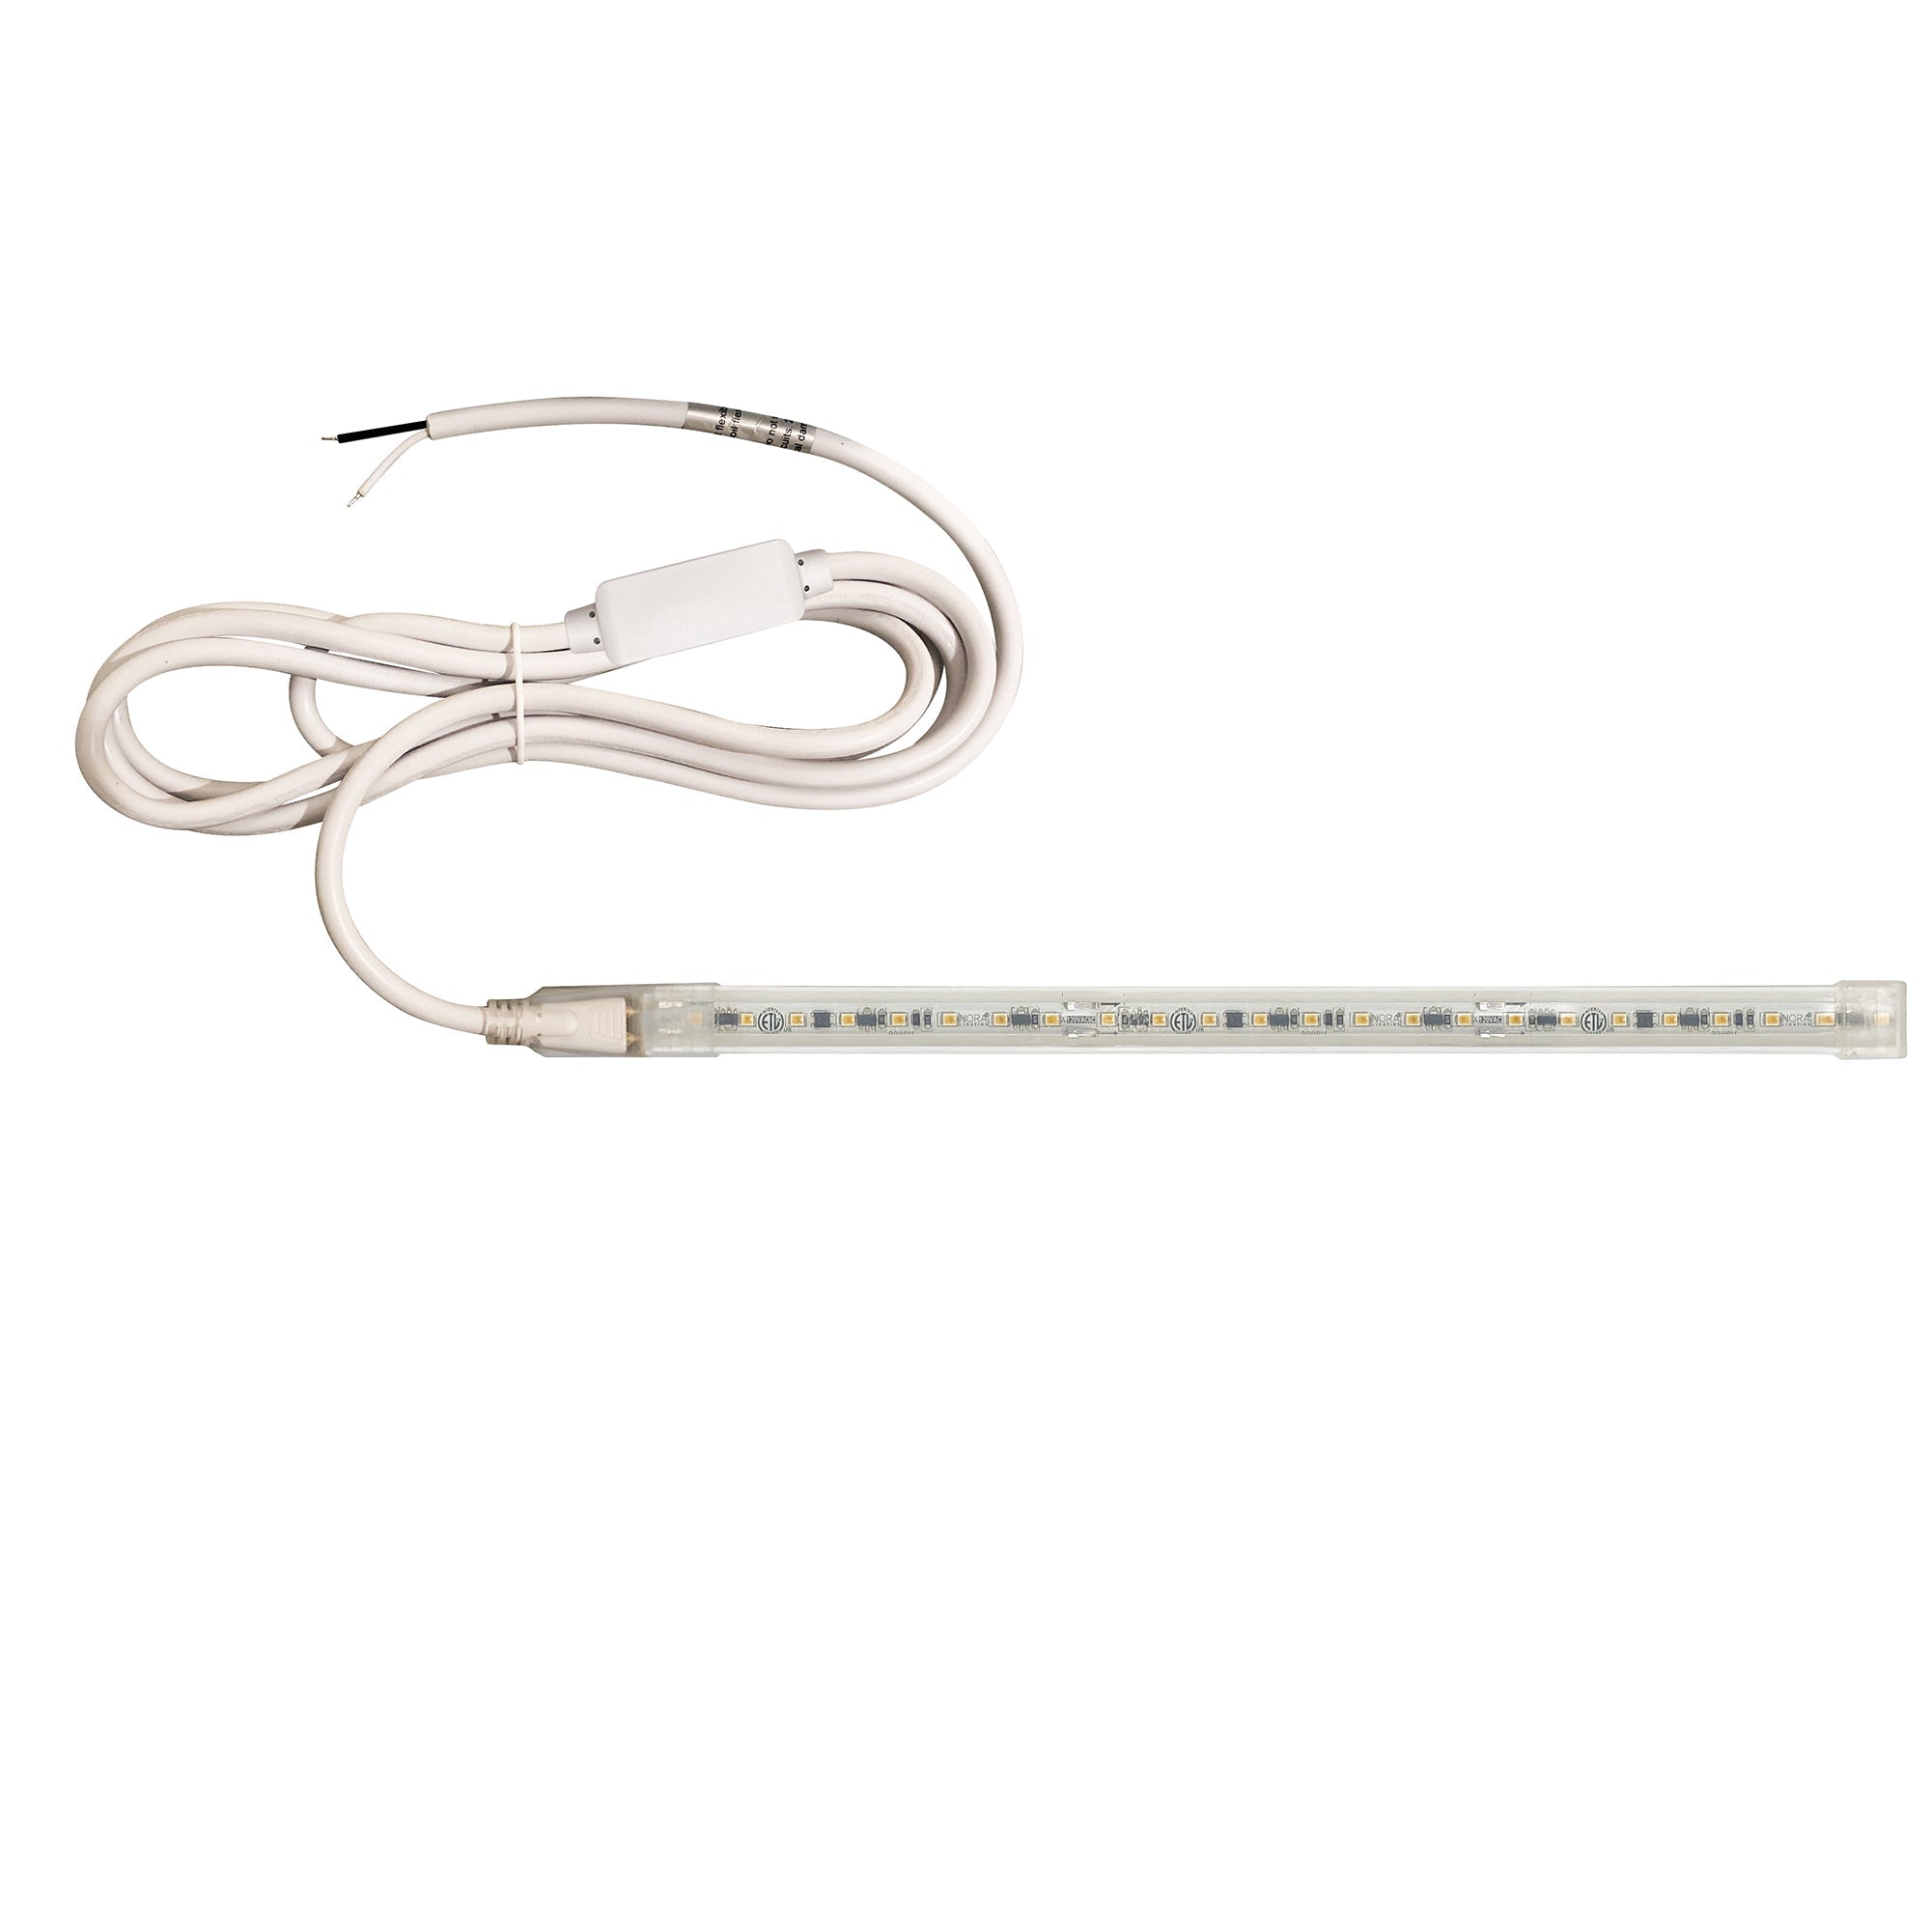 Nora Lighting NUTP13-W77-4-12-930/HWSP - Accent / Undercabinet - Custom Cut 77-ft, 4-in 120V Continuous LED Tape Light, 330lm / 3.6W per foot, 3000K, w/ Mounting Clips and 8' Hardwired Power Cord w/ Surge Protector